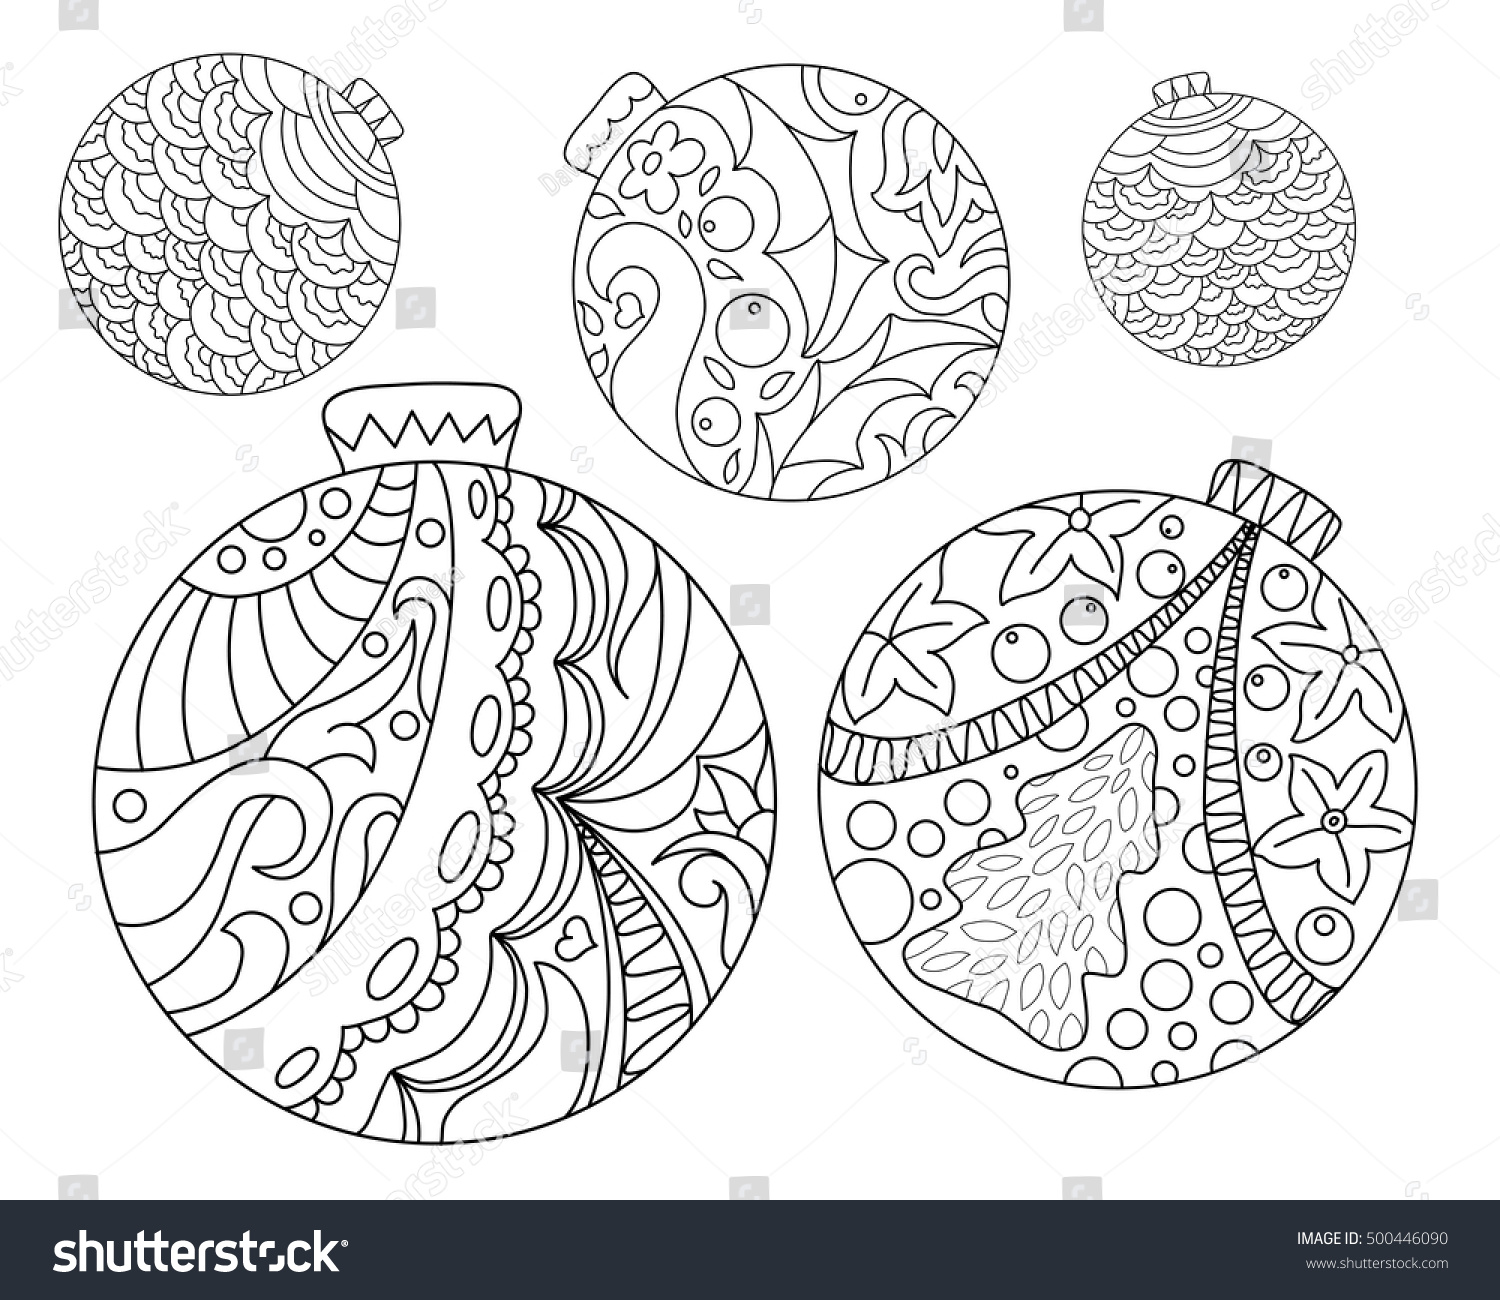 Coloring page with Christmas tree ornaments Christmas fir tree ornament adult coloring page Holiday